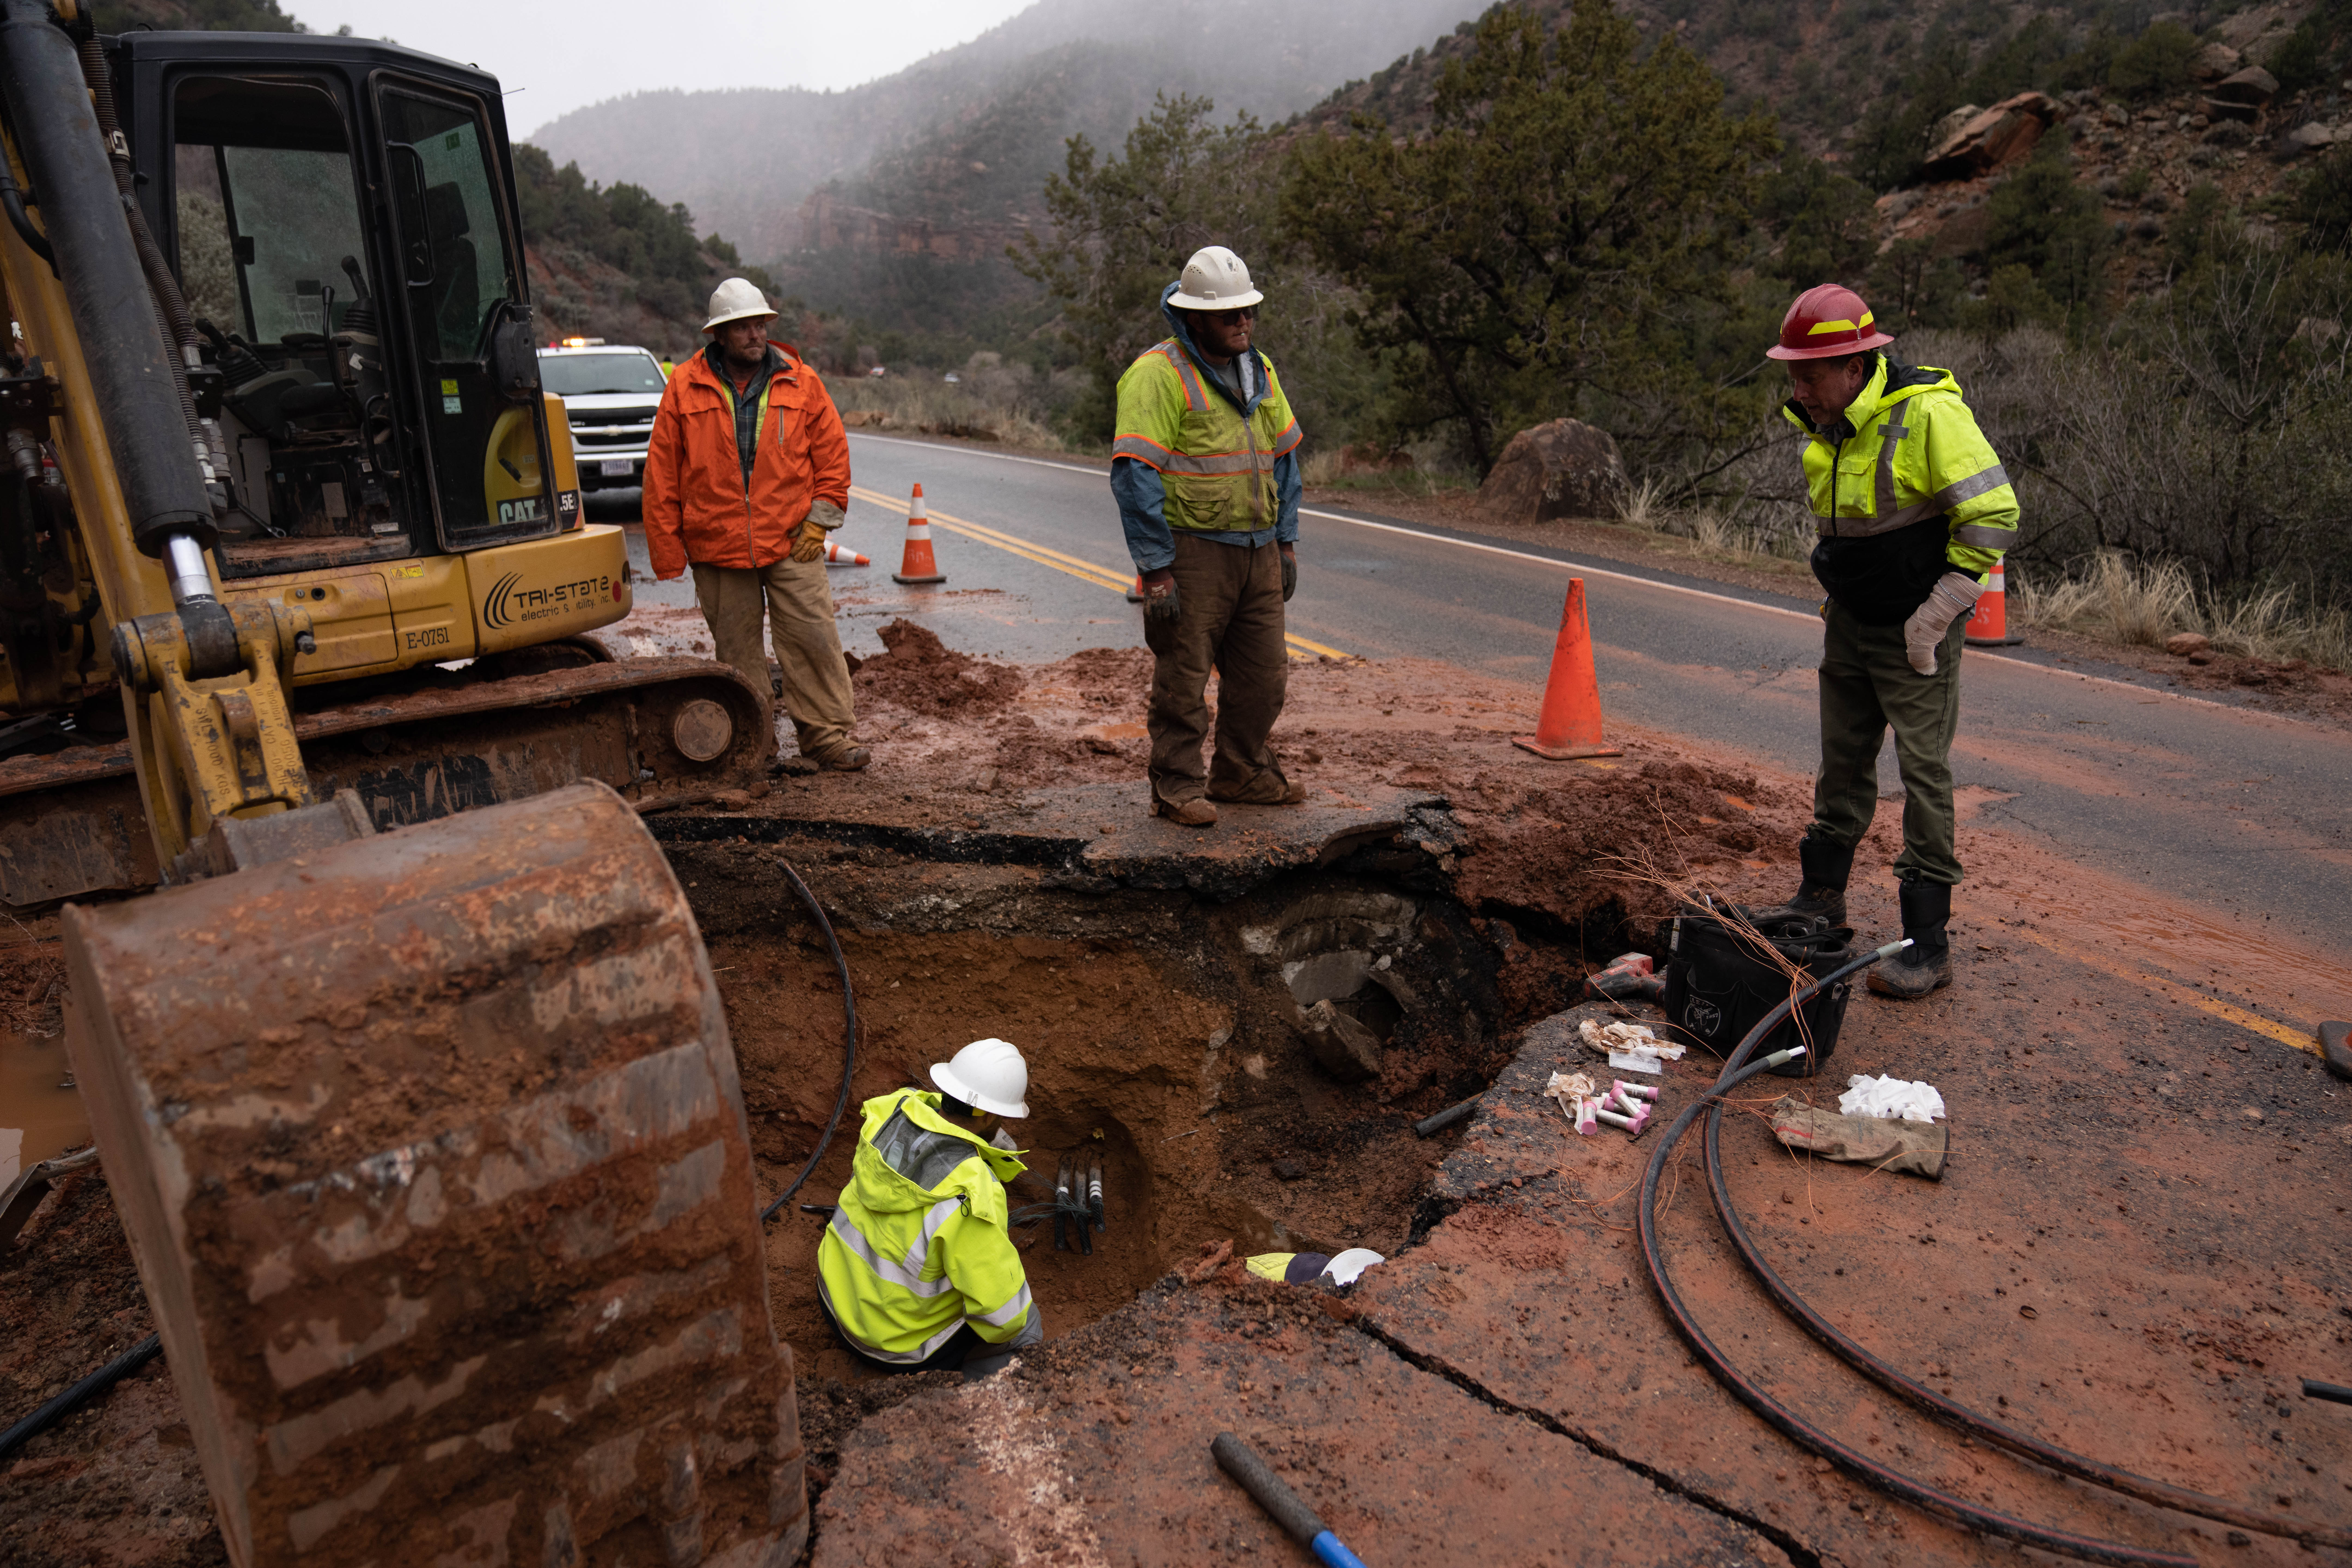 Four people work near a large hole in Zion Canyon Scenic Drive. An excavator stands nearby as people work in and near a hole.